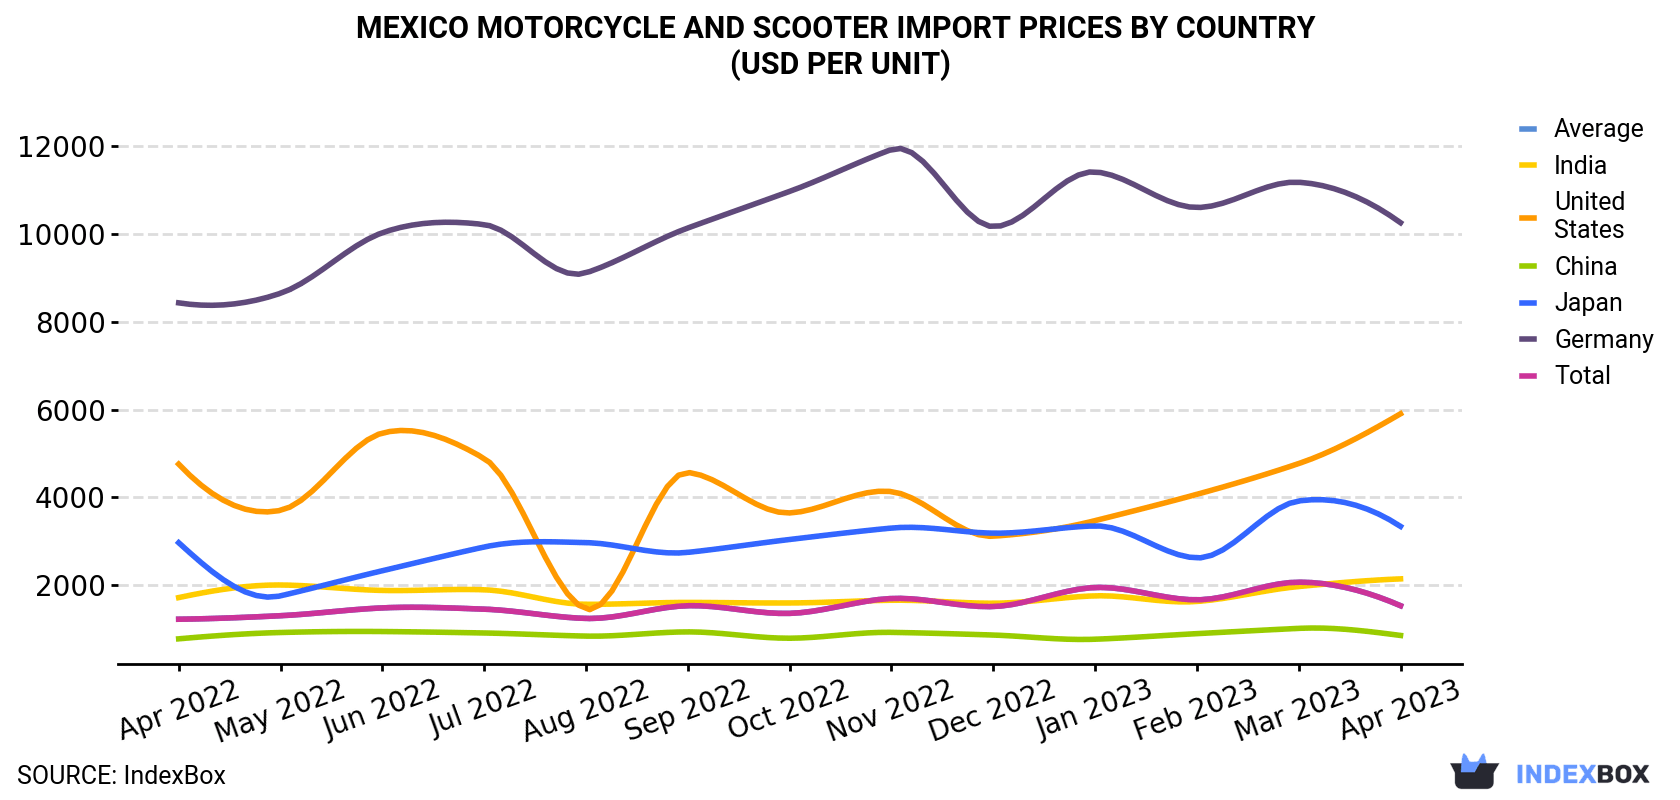 Mexico Motorcycle And Scooter Import Prices By Country (USD Per Unit)